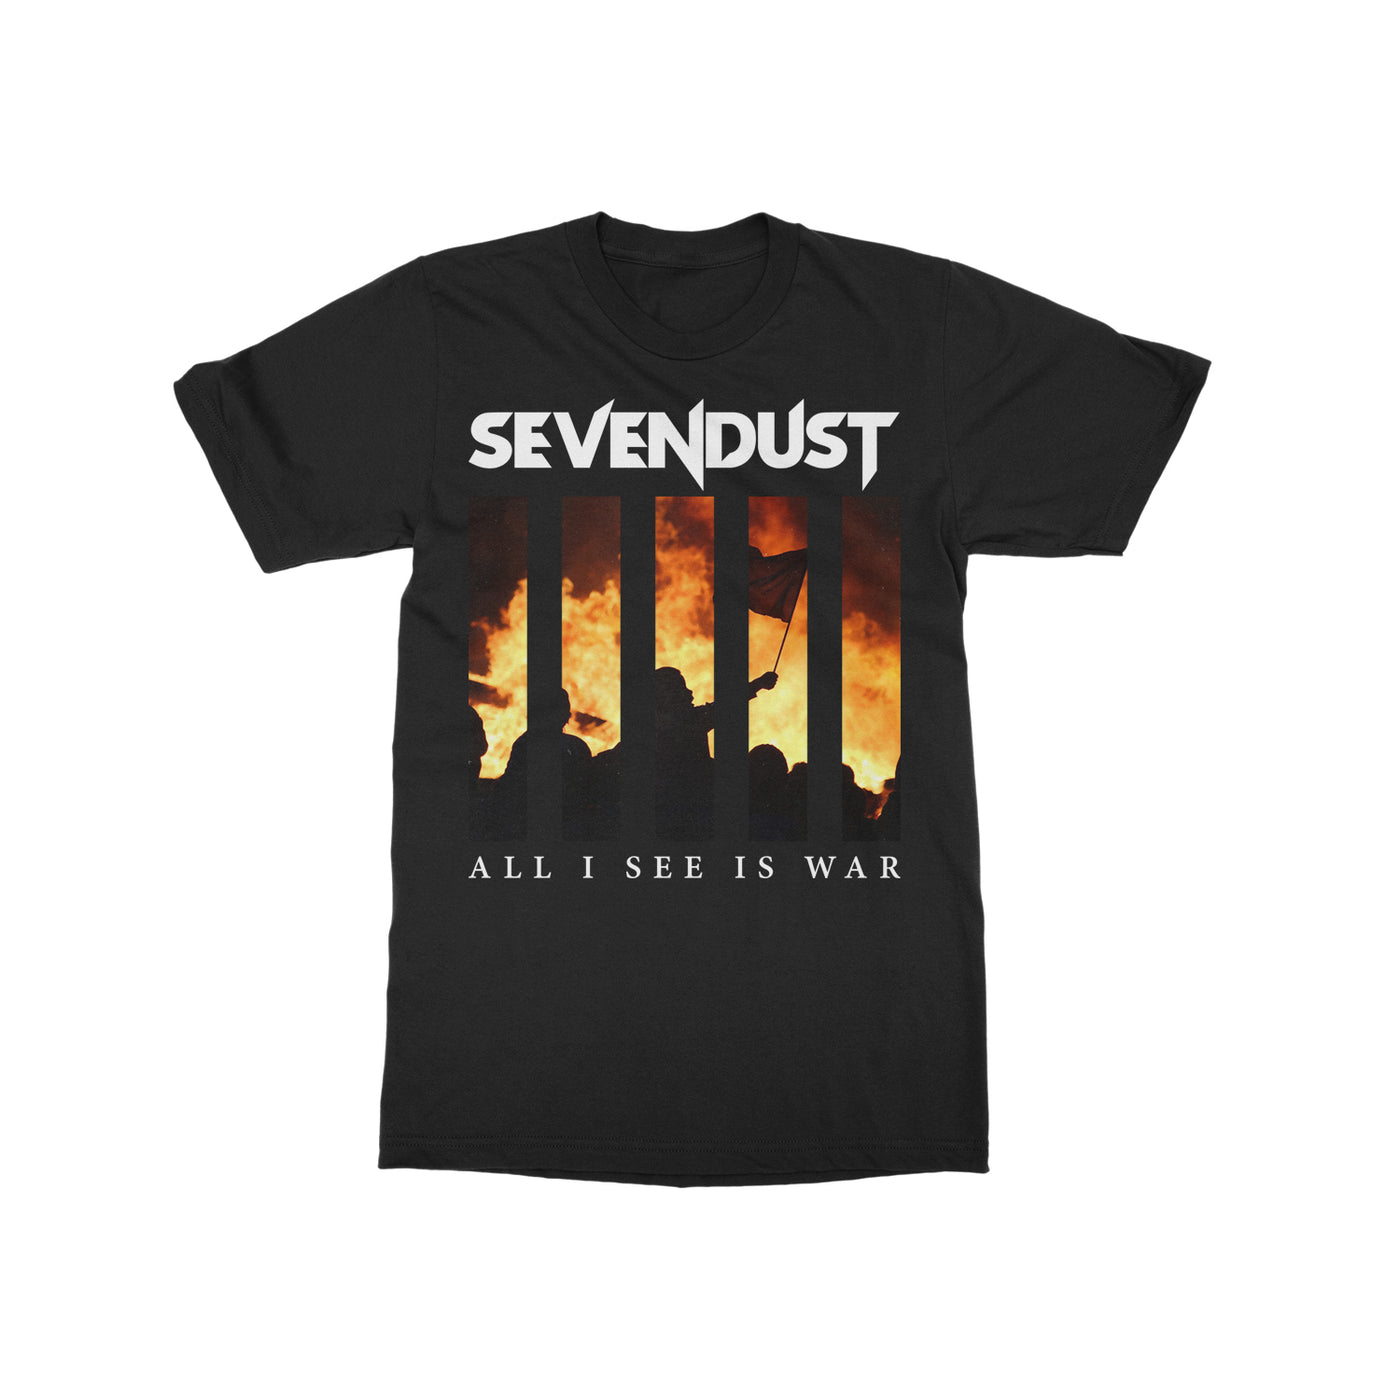 All I See Is War Black T-Shirt